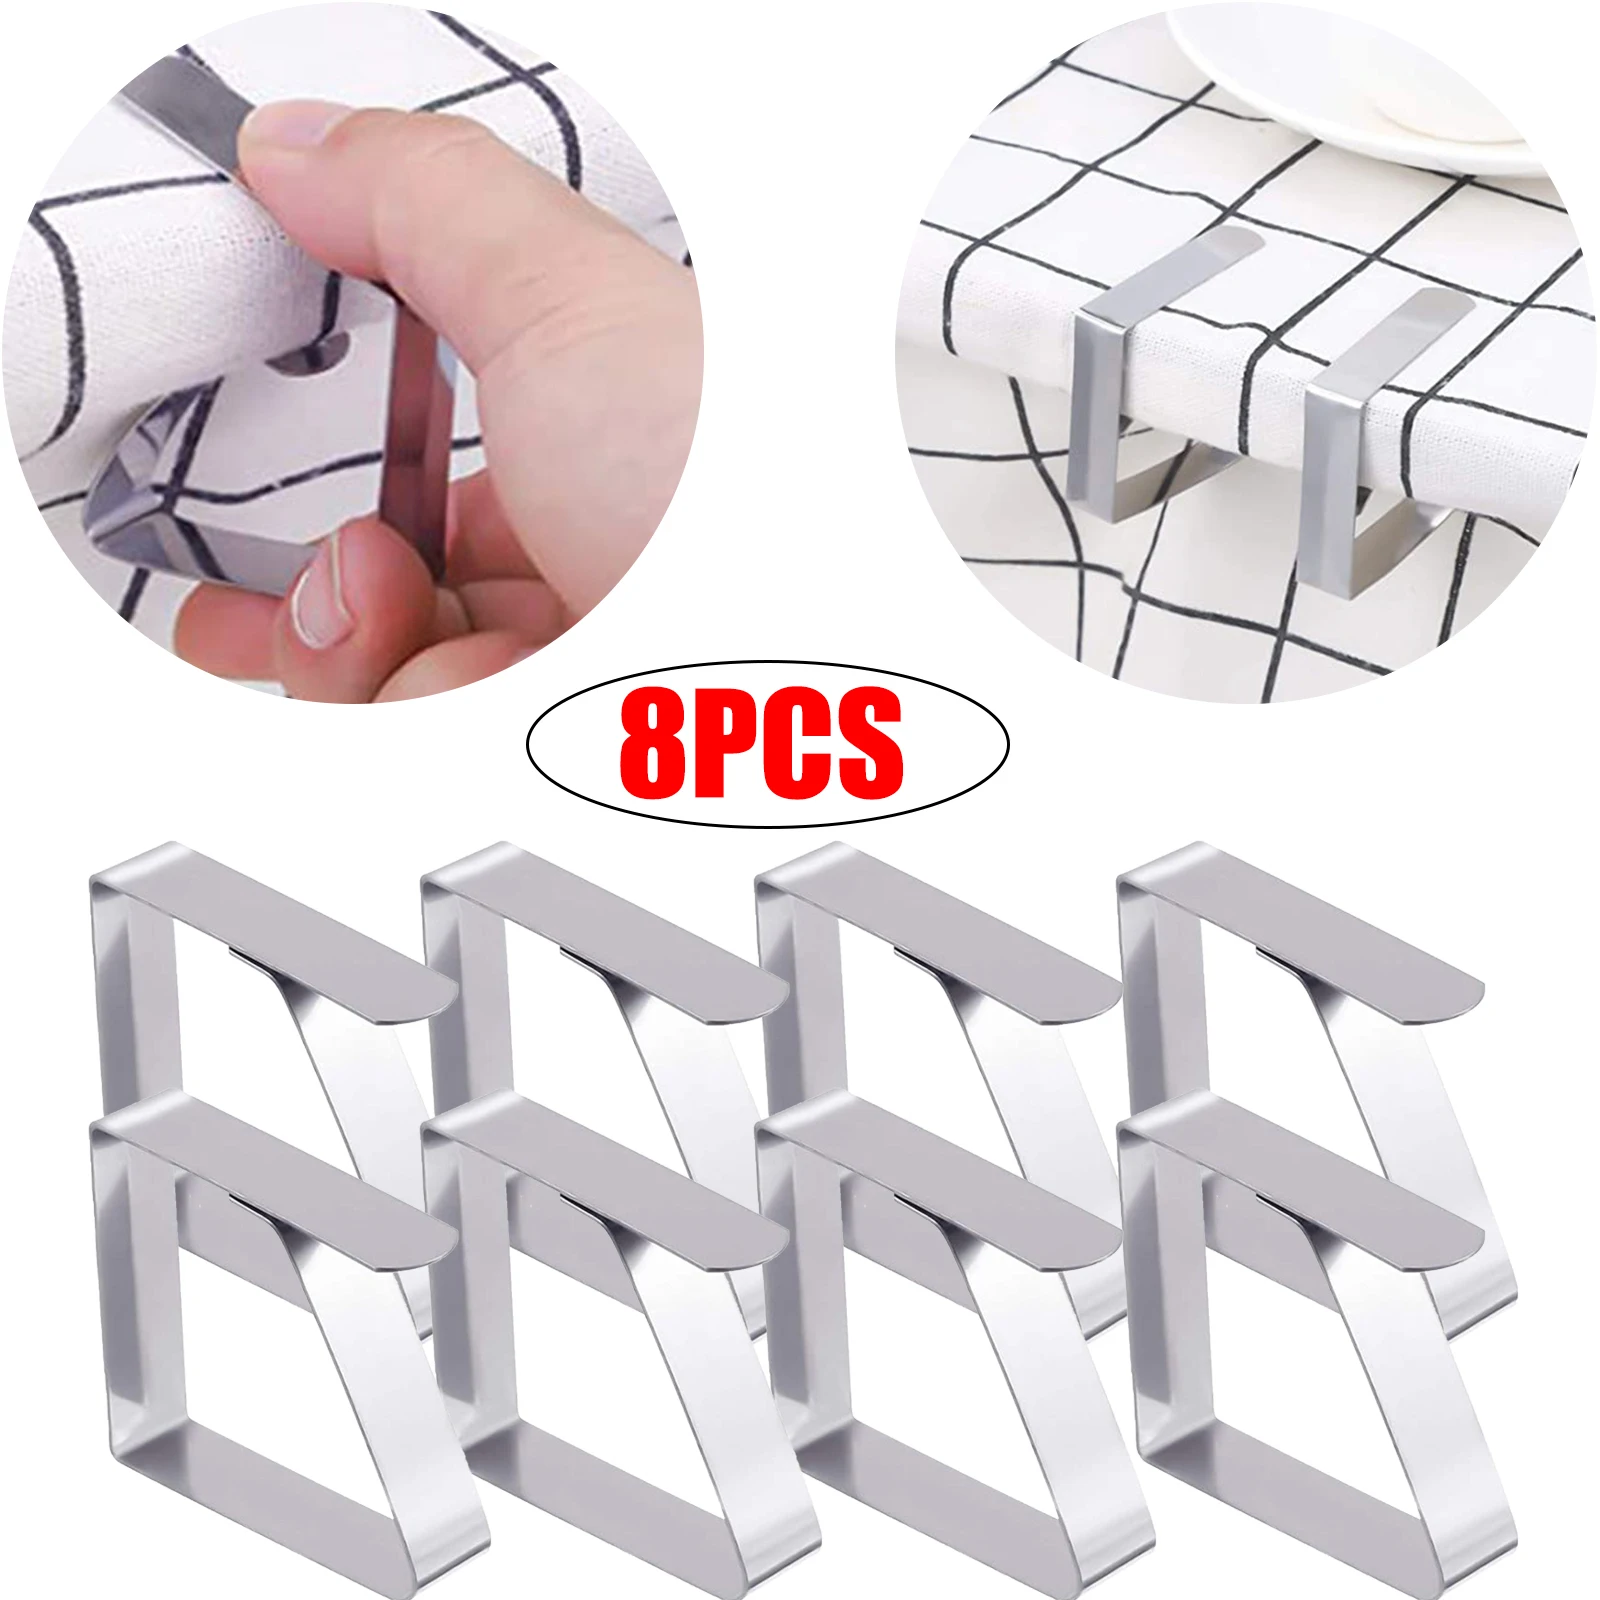 

8PCS Tablecloth Clips Picnic Table Clips Stainless Steel Table Cloth Cover Clamps Table Cloth Holders Ideal for Weddings Party